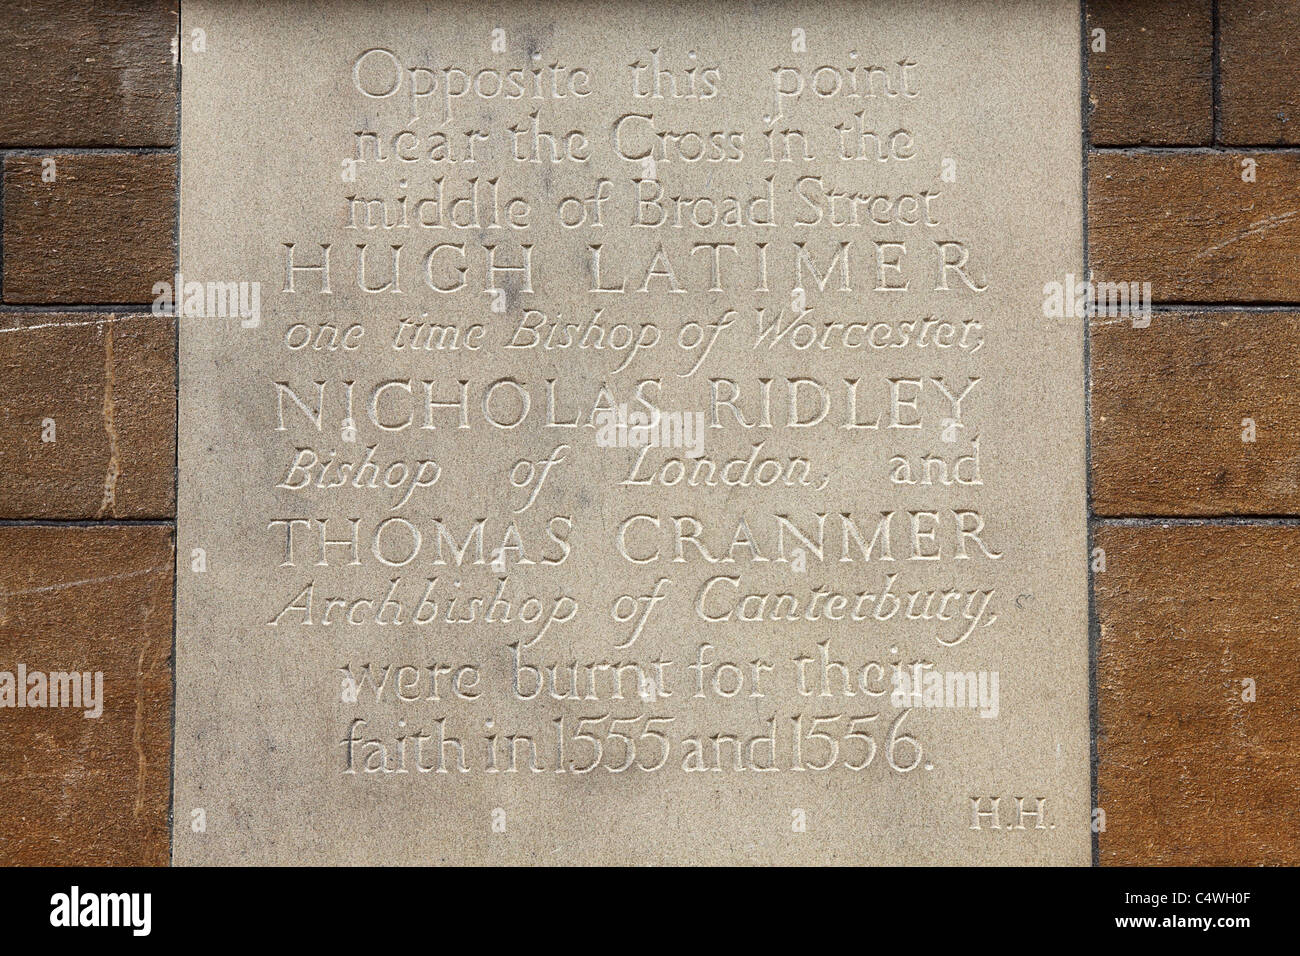 A plaque records the spot when the Oxford Martyrs were put to death in 1555 and 1556. Stock Photo